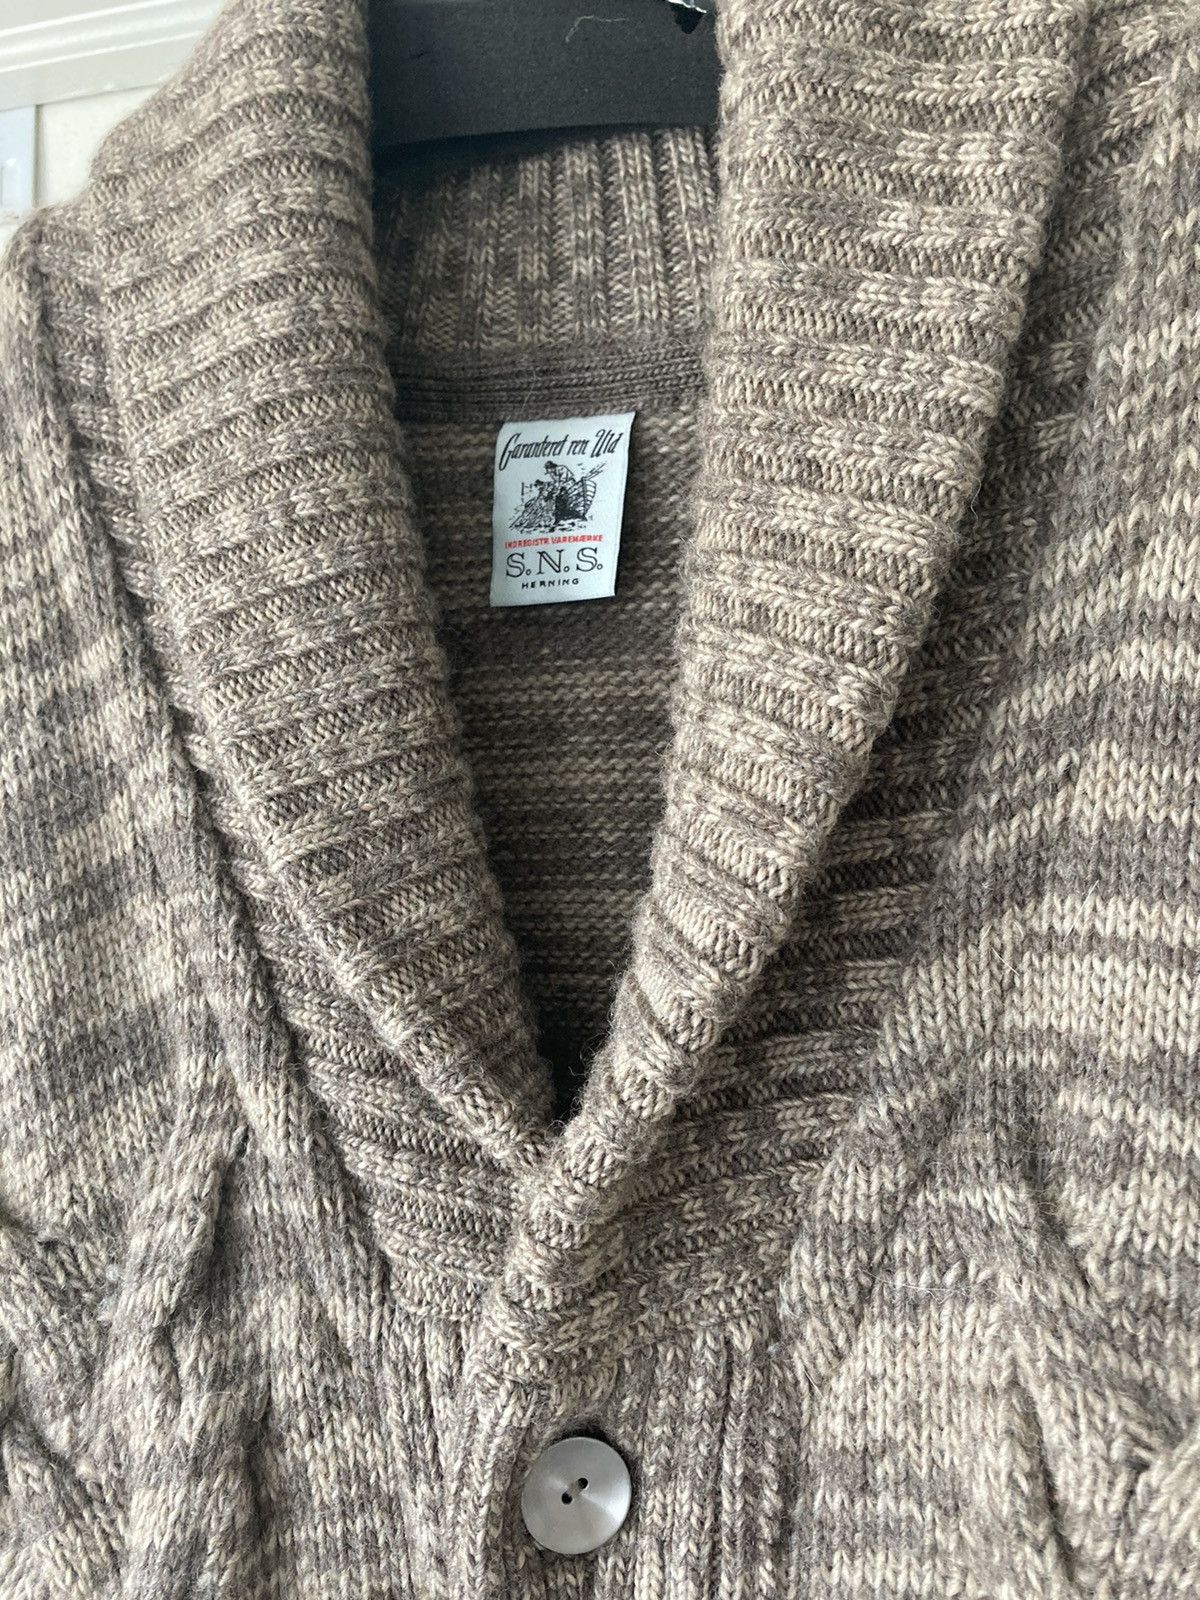 S.N.S. Herning Long cardigan cable knit Size US S / EU 44-46 / 1 - 6 Thumbnail